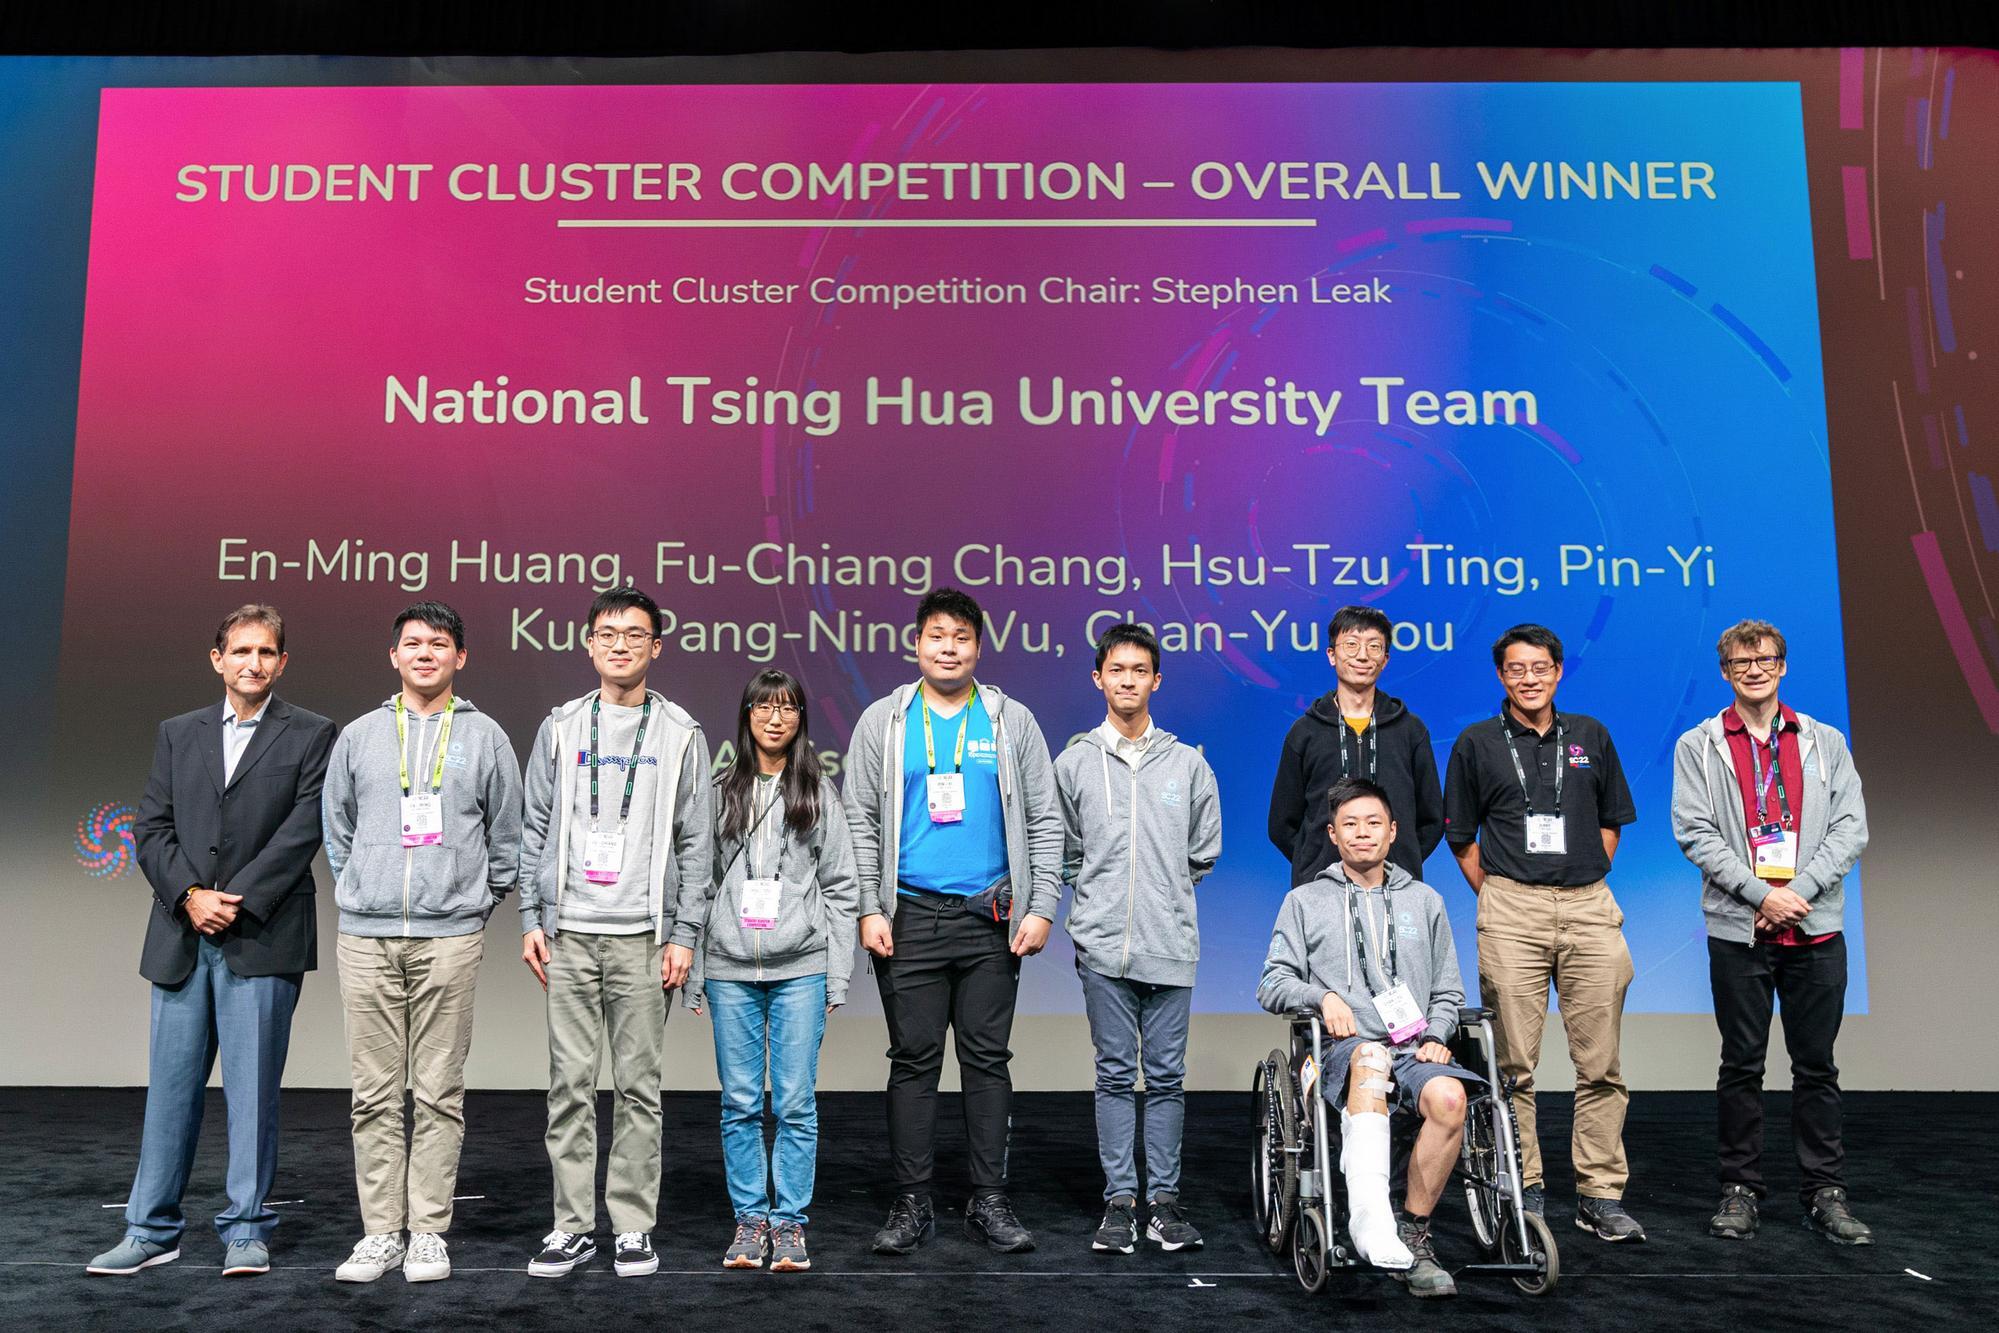 Student teams competing in international competitions are now able to receive academic credit, including this team from the Department of Computer Science which recently won the championship at the World Supercomputer Student Cluster Competition (SCC).